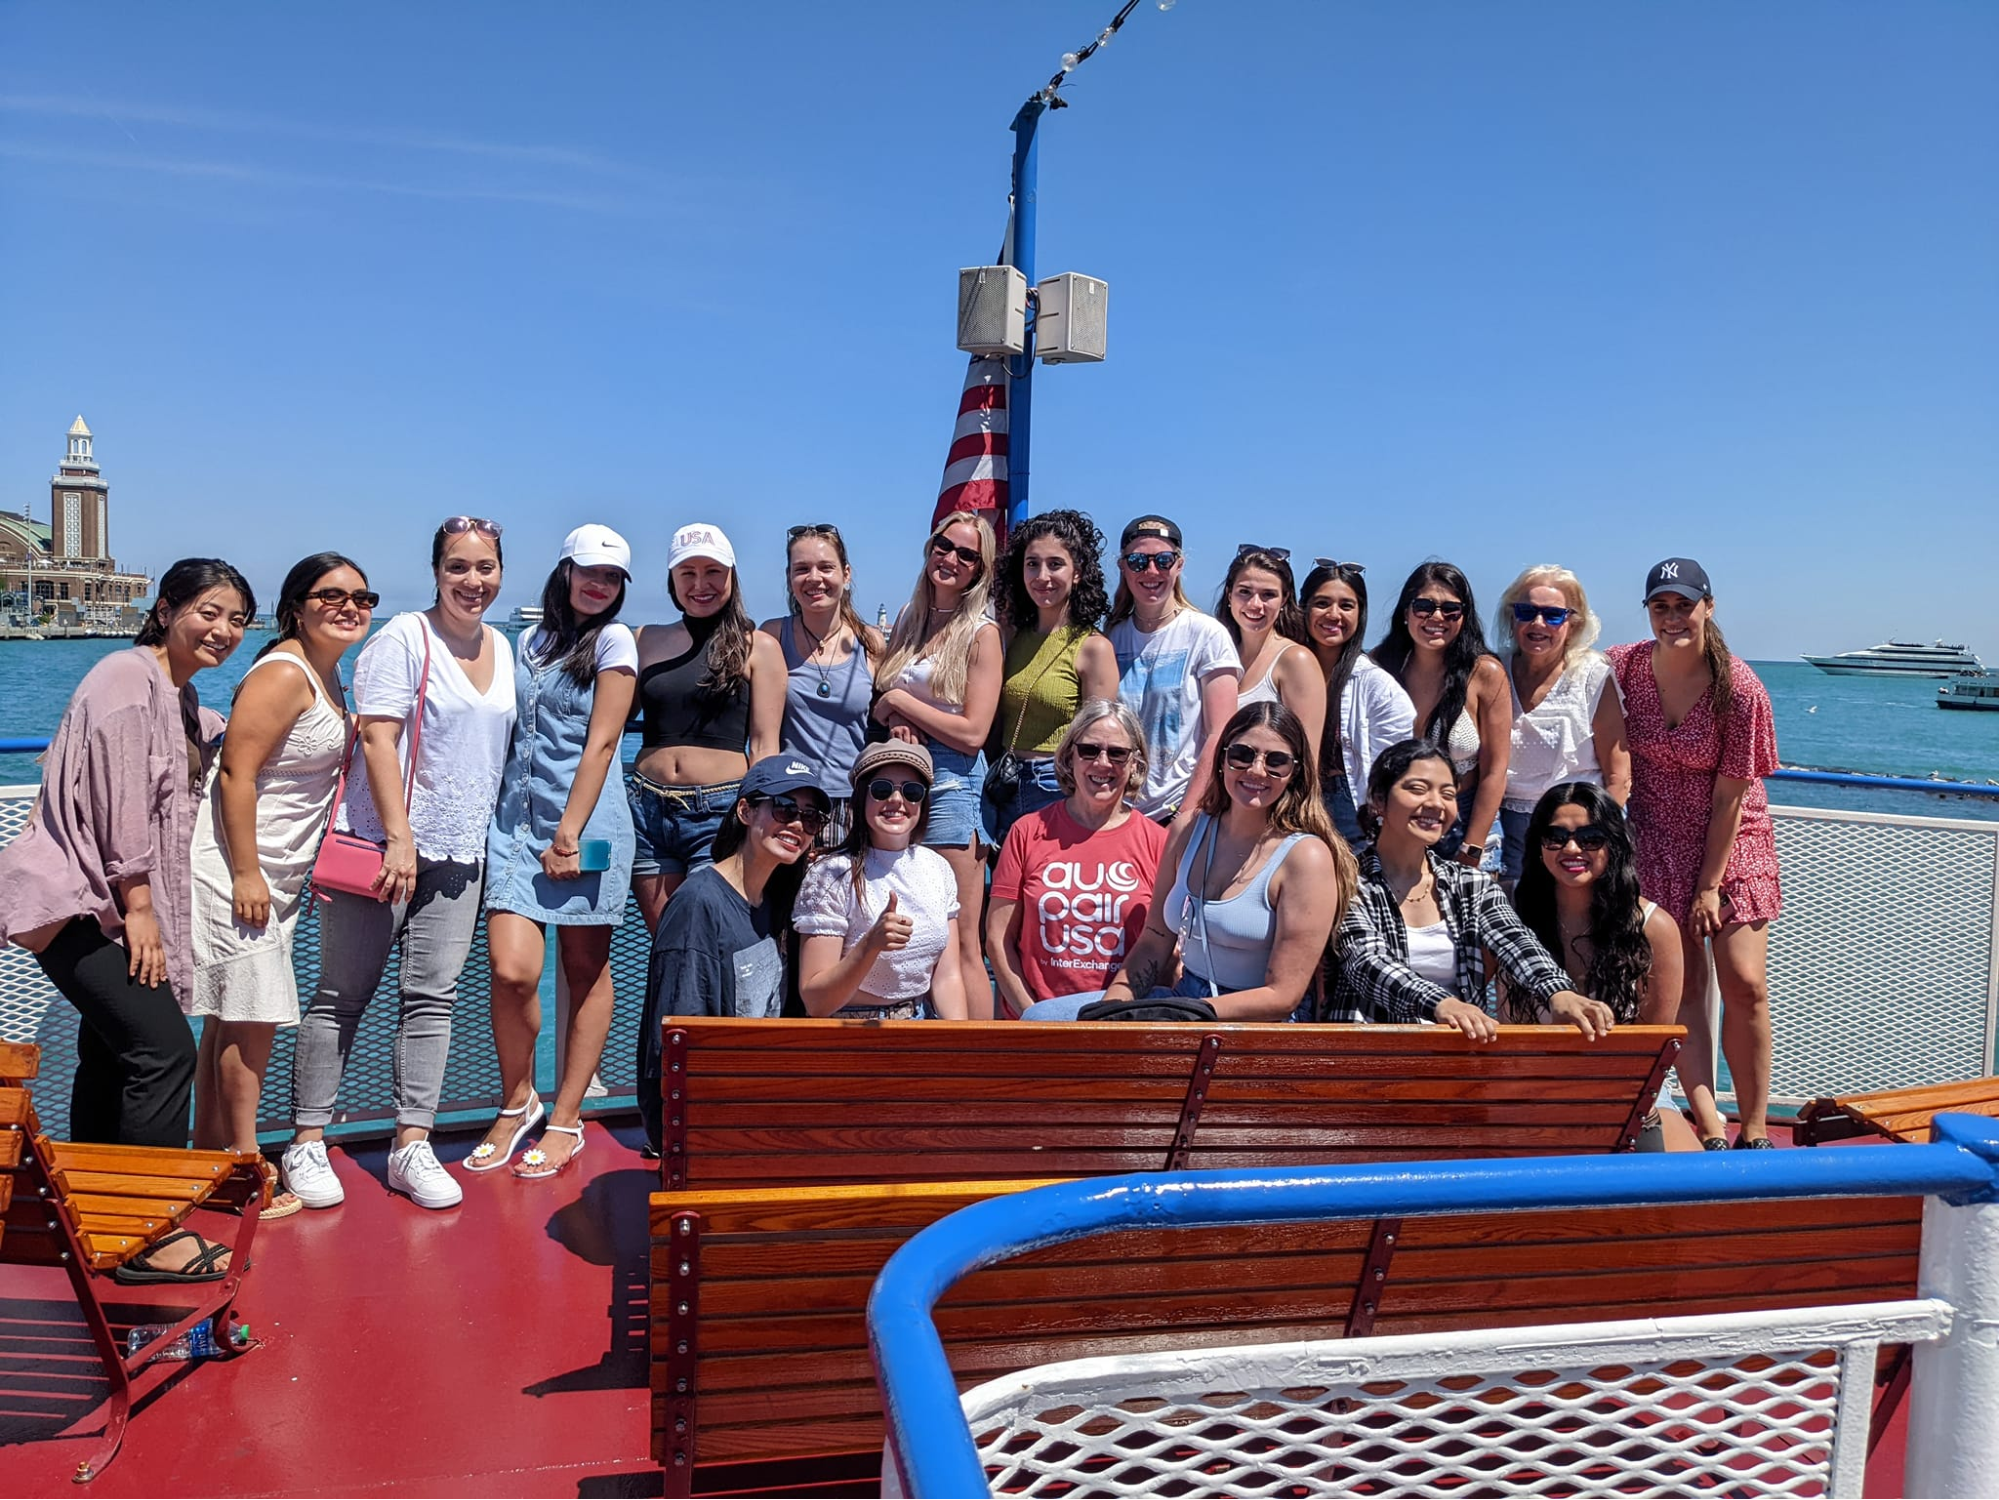 Chicago-area au pairs enjoy a boat ride on Lake Michigan.